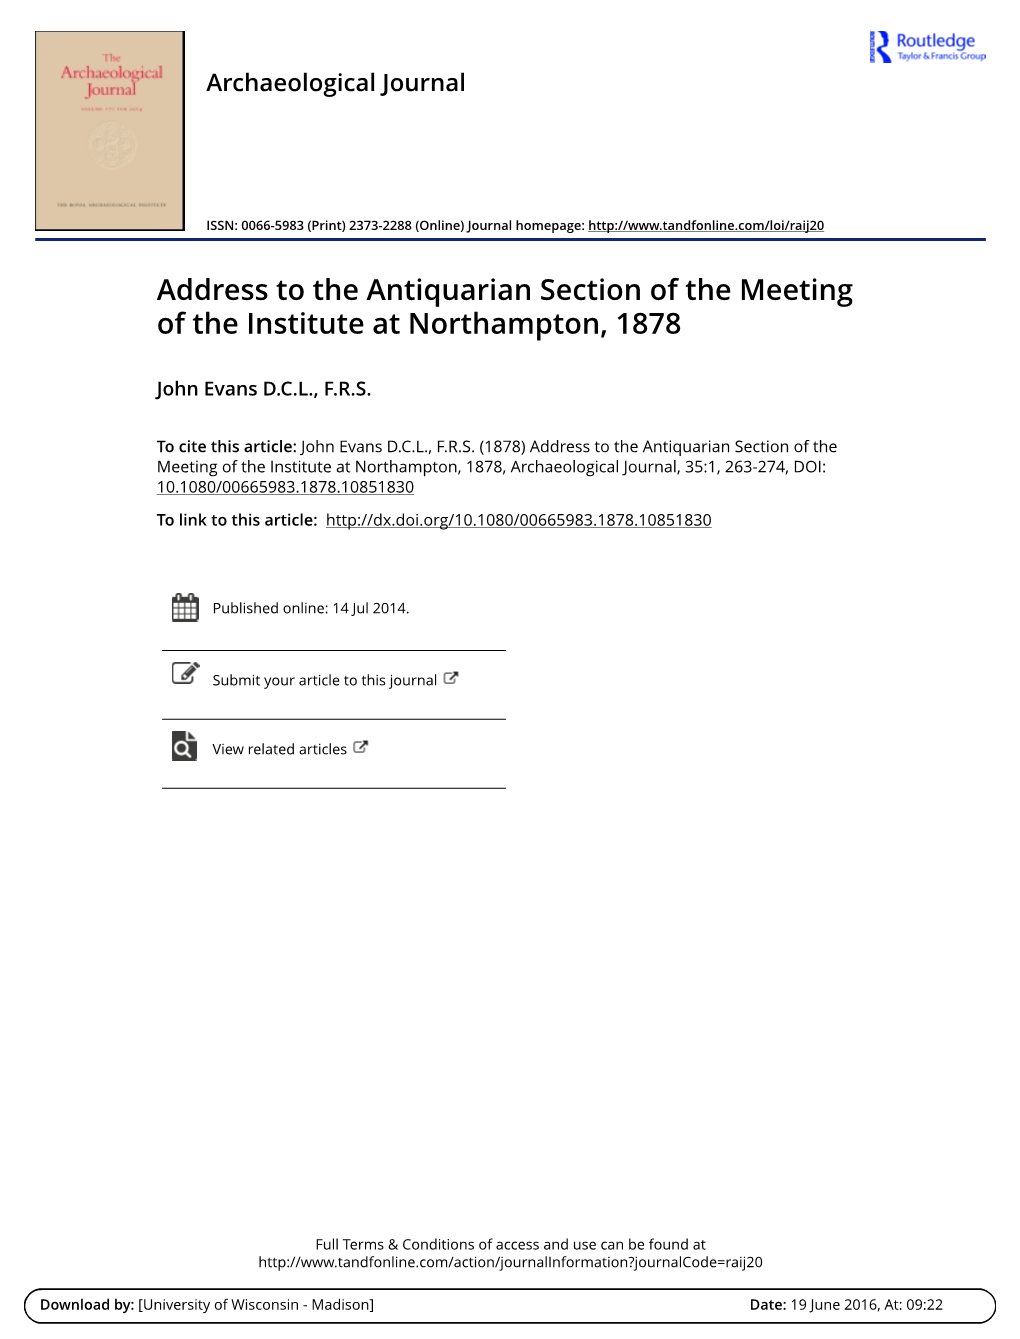 Address to the Antiquarian Section of the Meeting of the Institute at Northampton, 1878